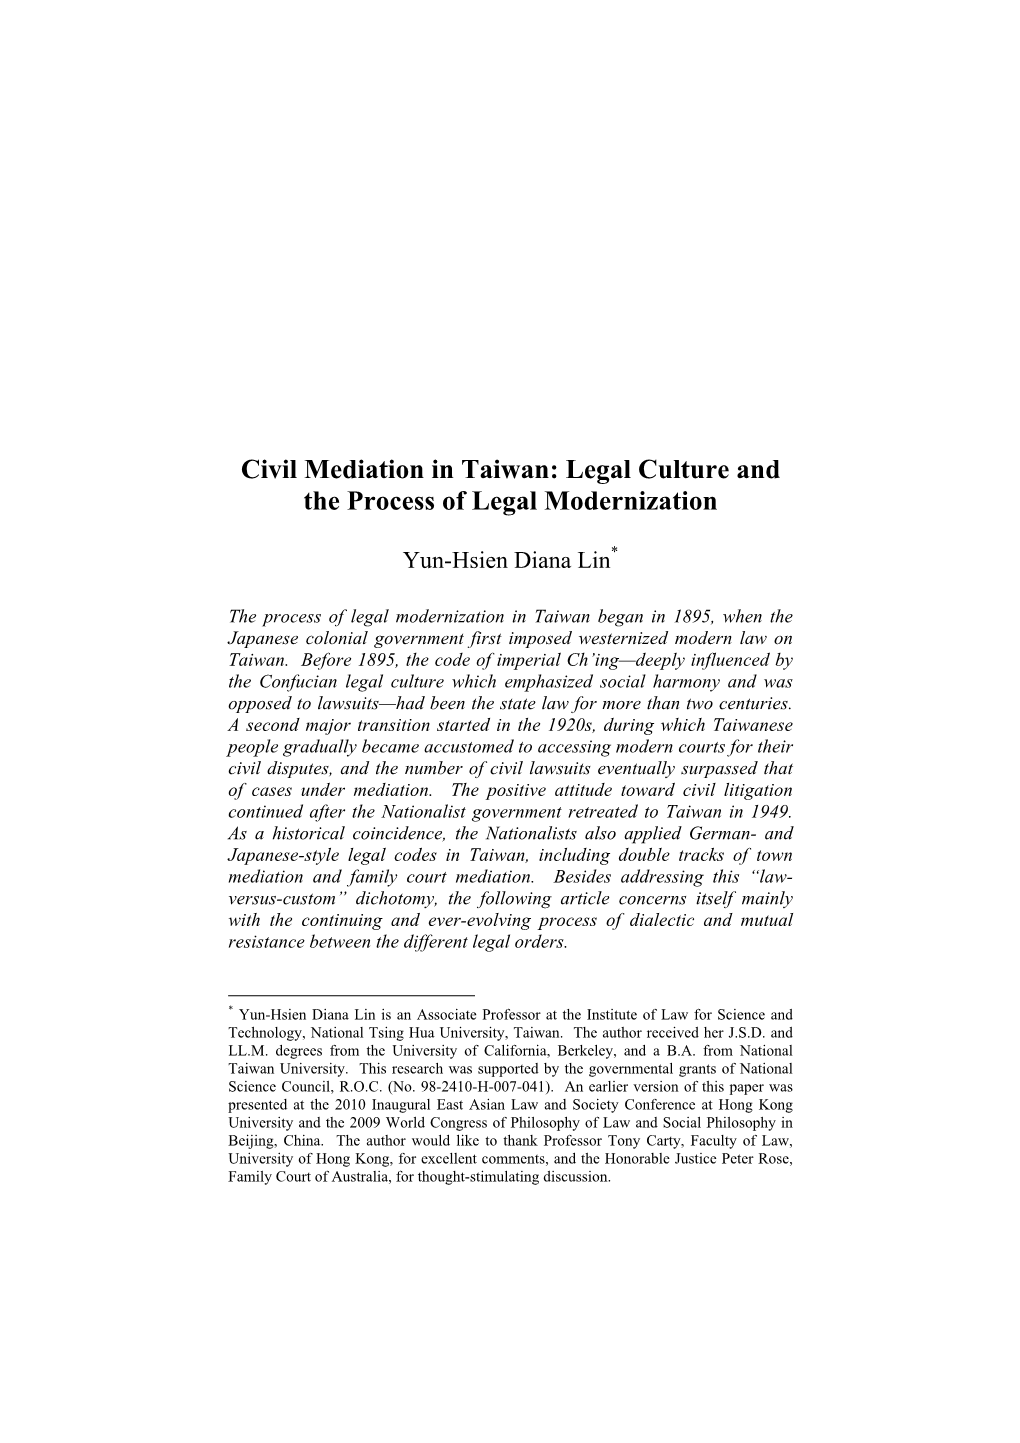 Civil Mediation in Taiwan: Legal Culture and the Process of Legal Modernization